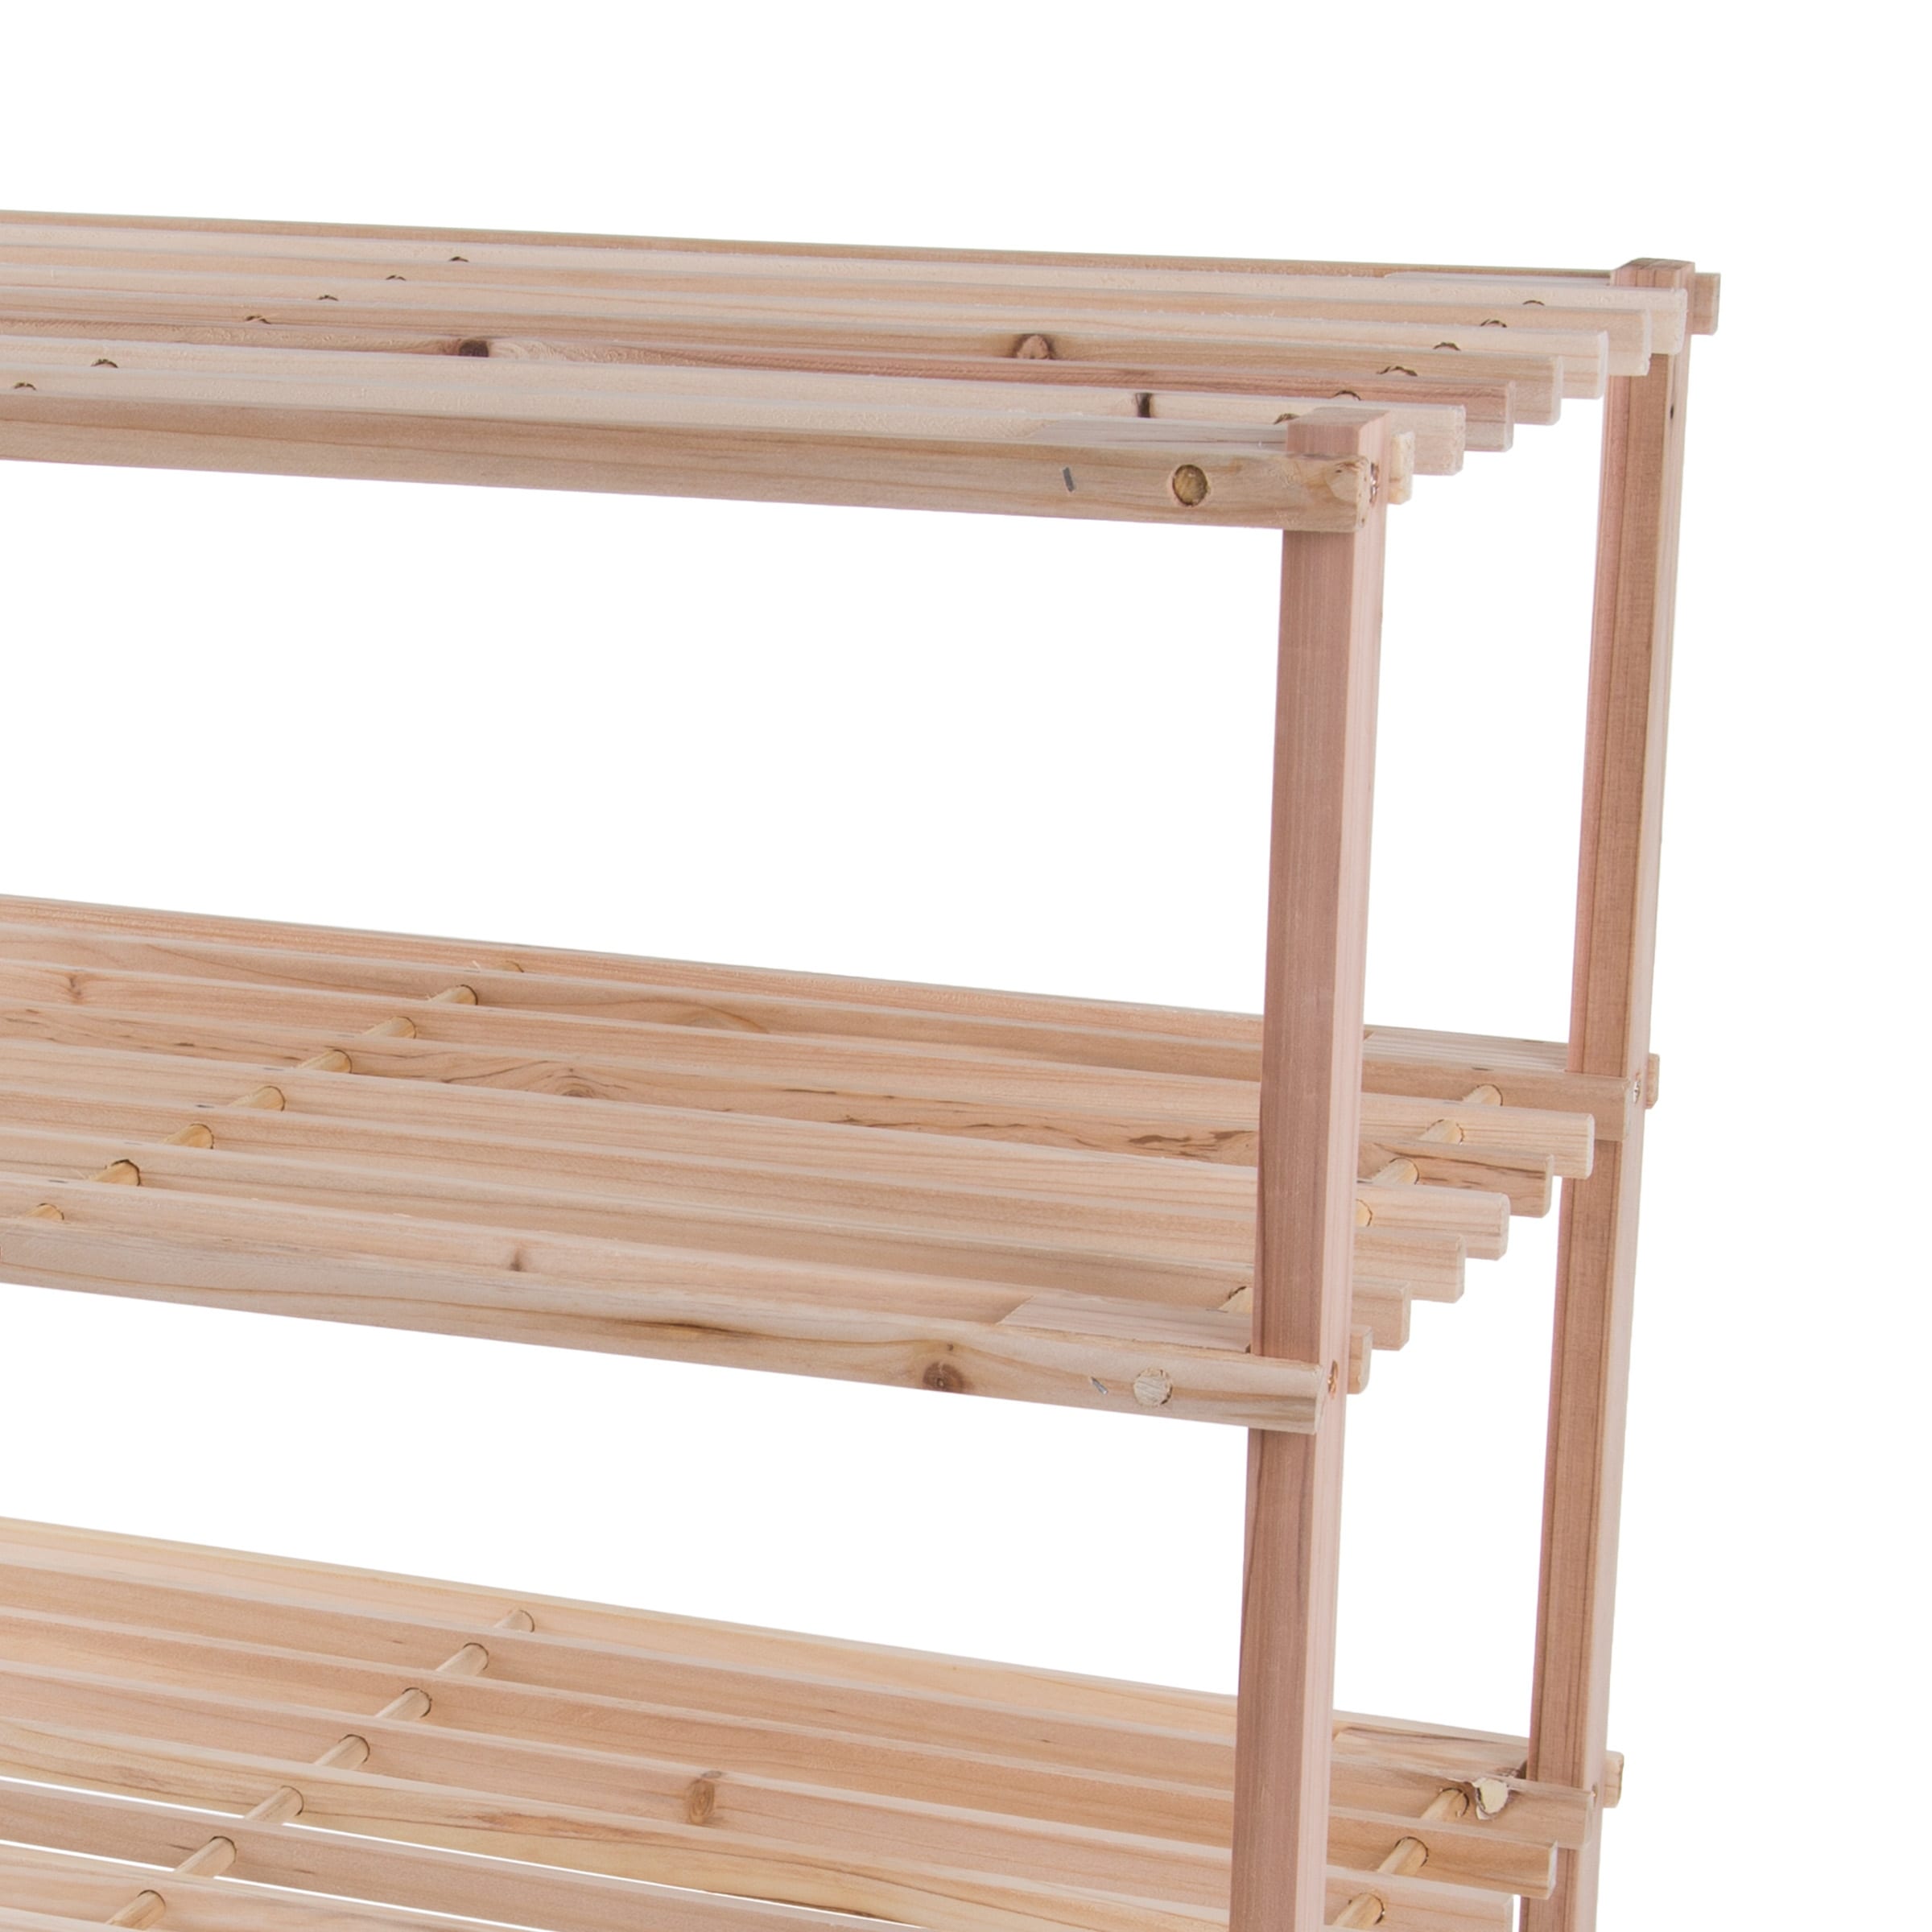 https://ak1.ostkcdn.com/images/products/is/images/direct/ab3127e0d8ae1c1525d84b9bf0675e49ca5e181c/Shoe-Storage-Rack---4-Tier-Wood-Shoe-Organizer-Shoe-Shelf-Holds-12-Pairs-Sneakers-or-Boots-by-Lavish-Home-%28Light-Oak%29.jpg